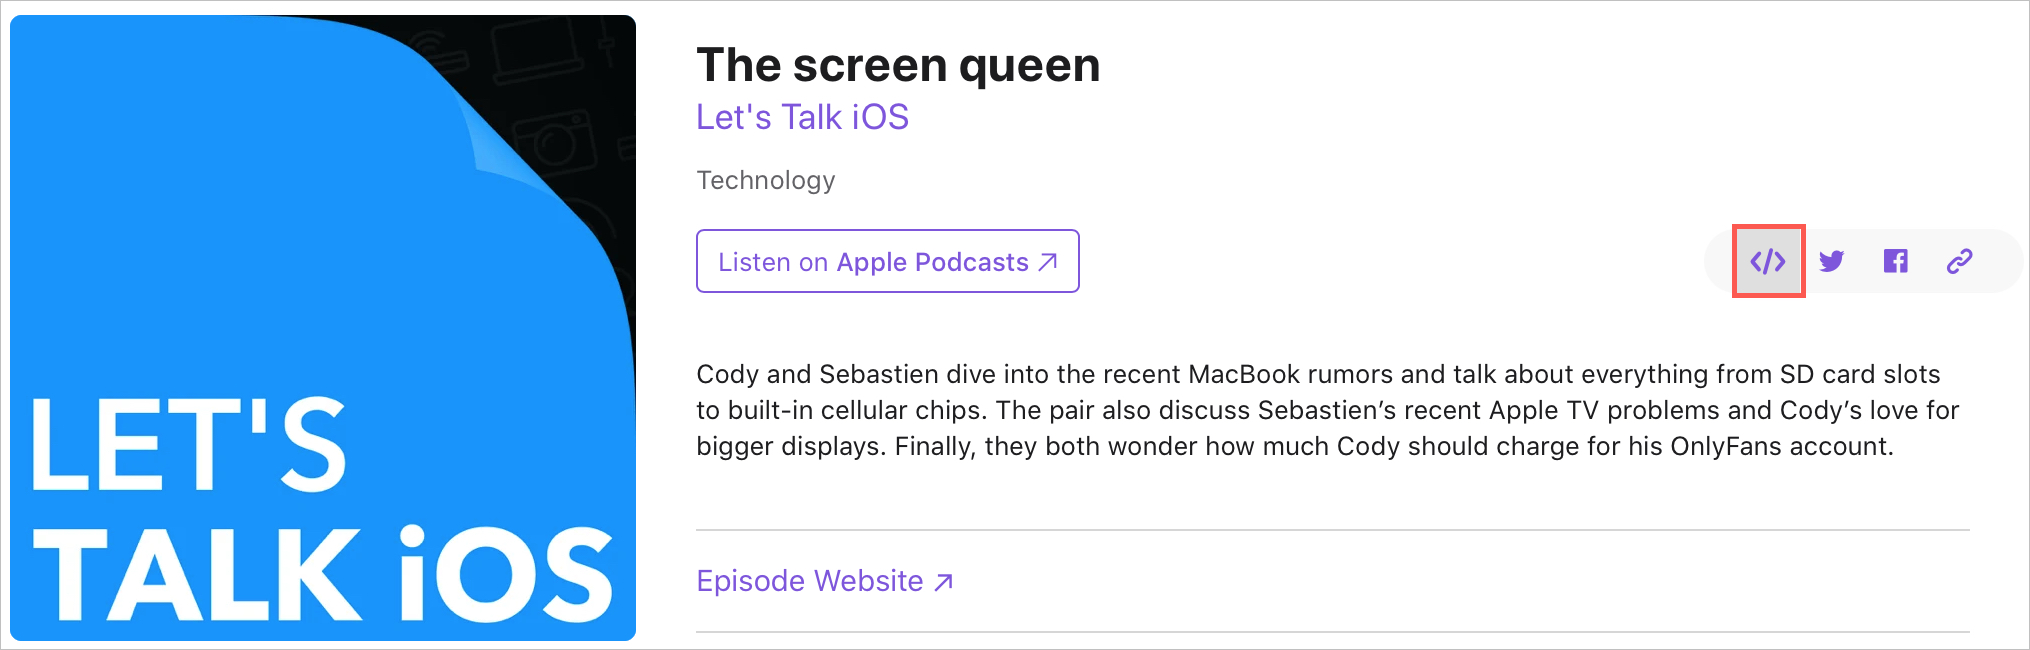 Apple Podcasts Episode Share Embed